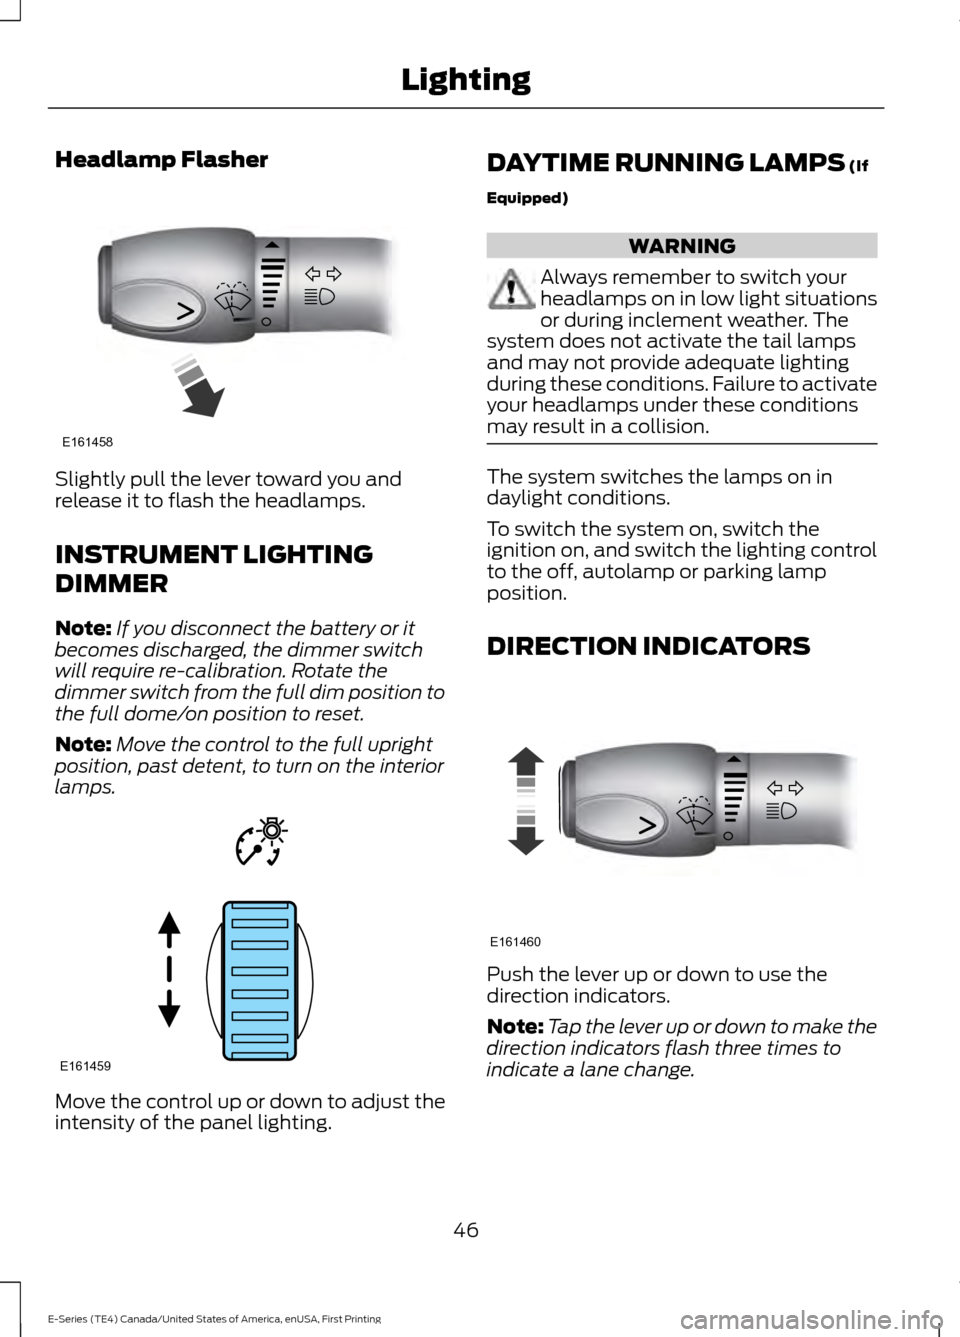 FORD E SERIES 2017 4.G Service Manual Headlamp Flasher
Slightly pull the lever toward you and
release it to flash the headlamps.
INSTRUMENT LIGHTING
DIMMER
Note:
If you disconnect the battery or it
becomes discharged, the dimmer switch
wi